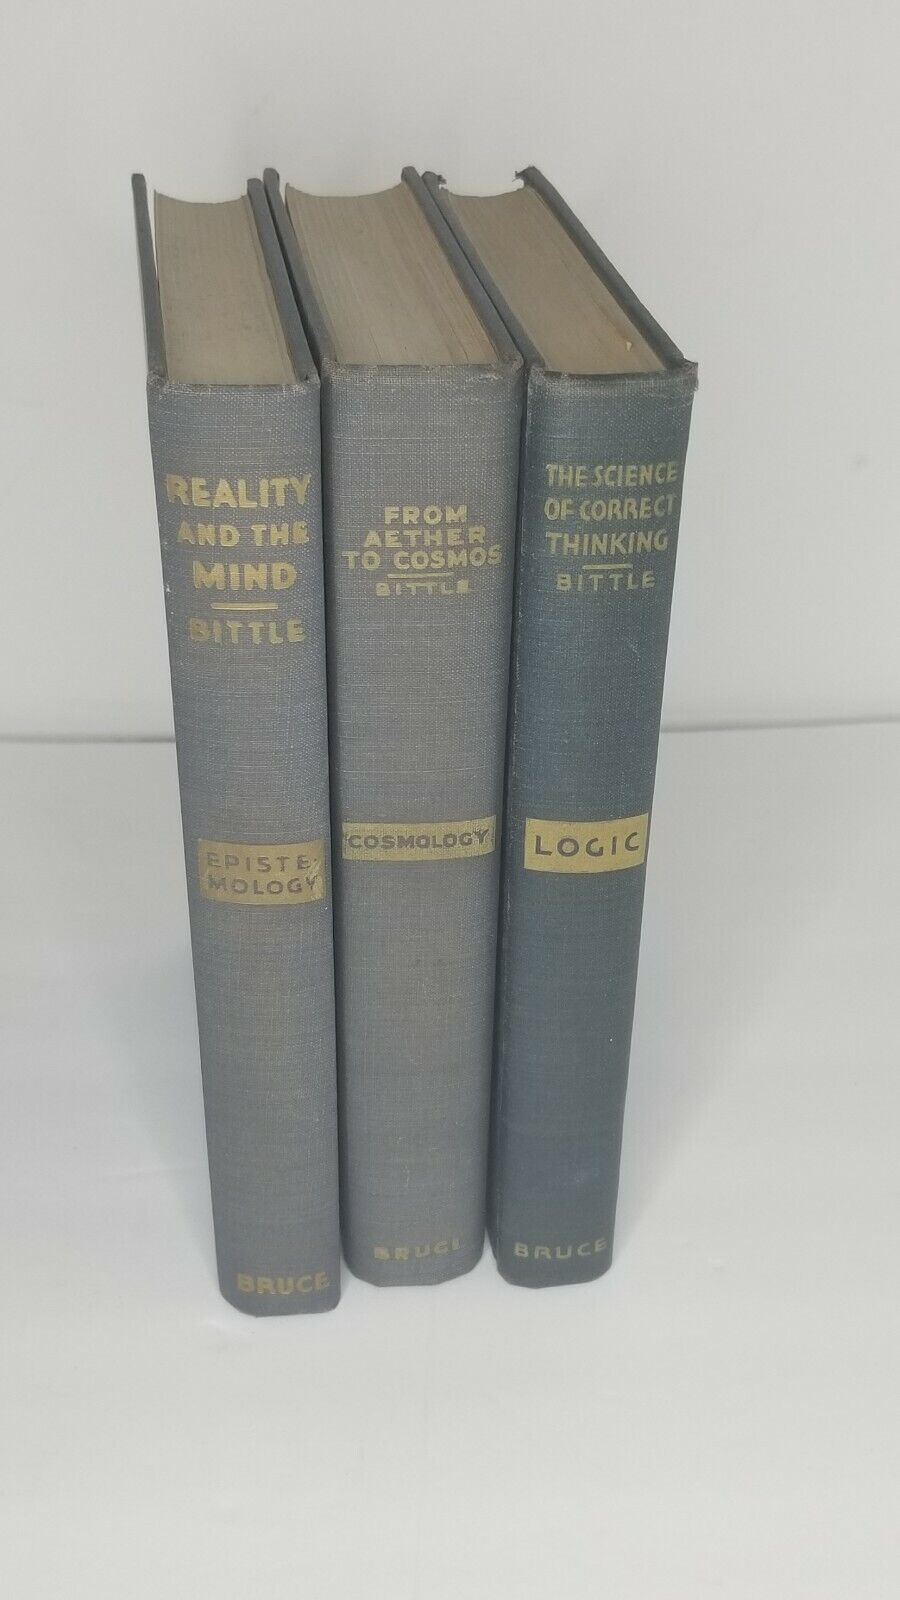 Lot Of 3 Losic, Cosmology, And Epistemology By Bruce 1940-1950s